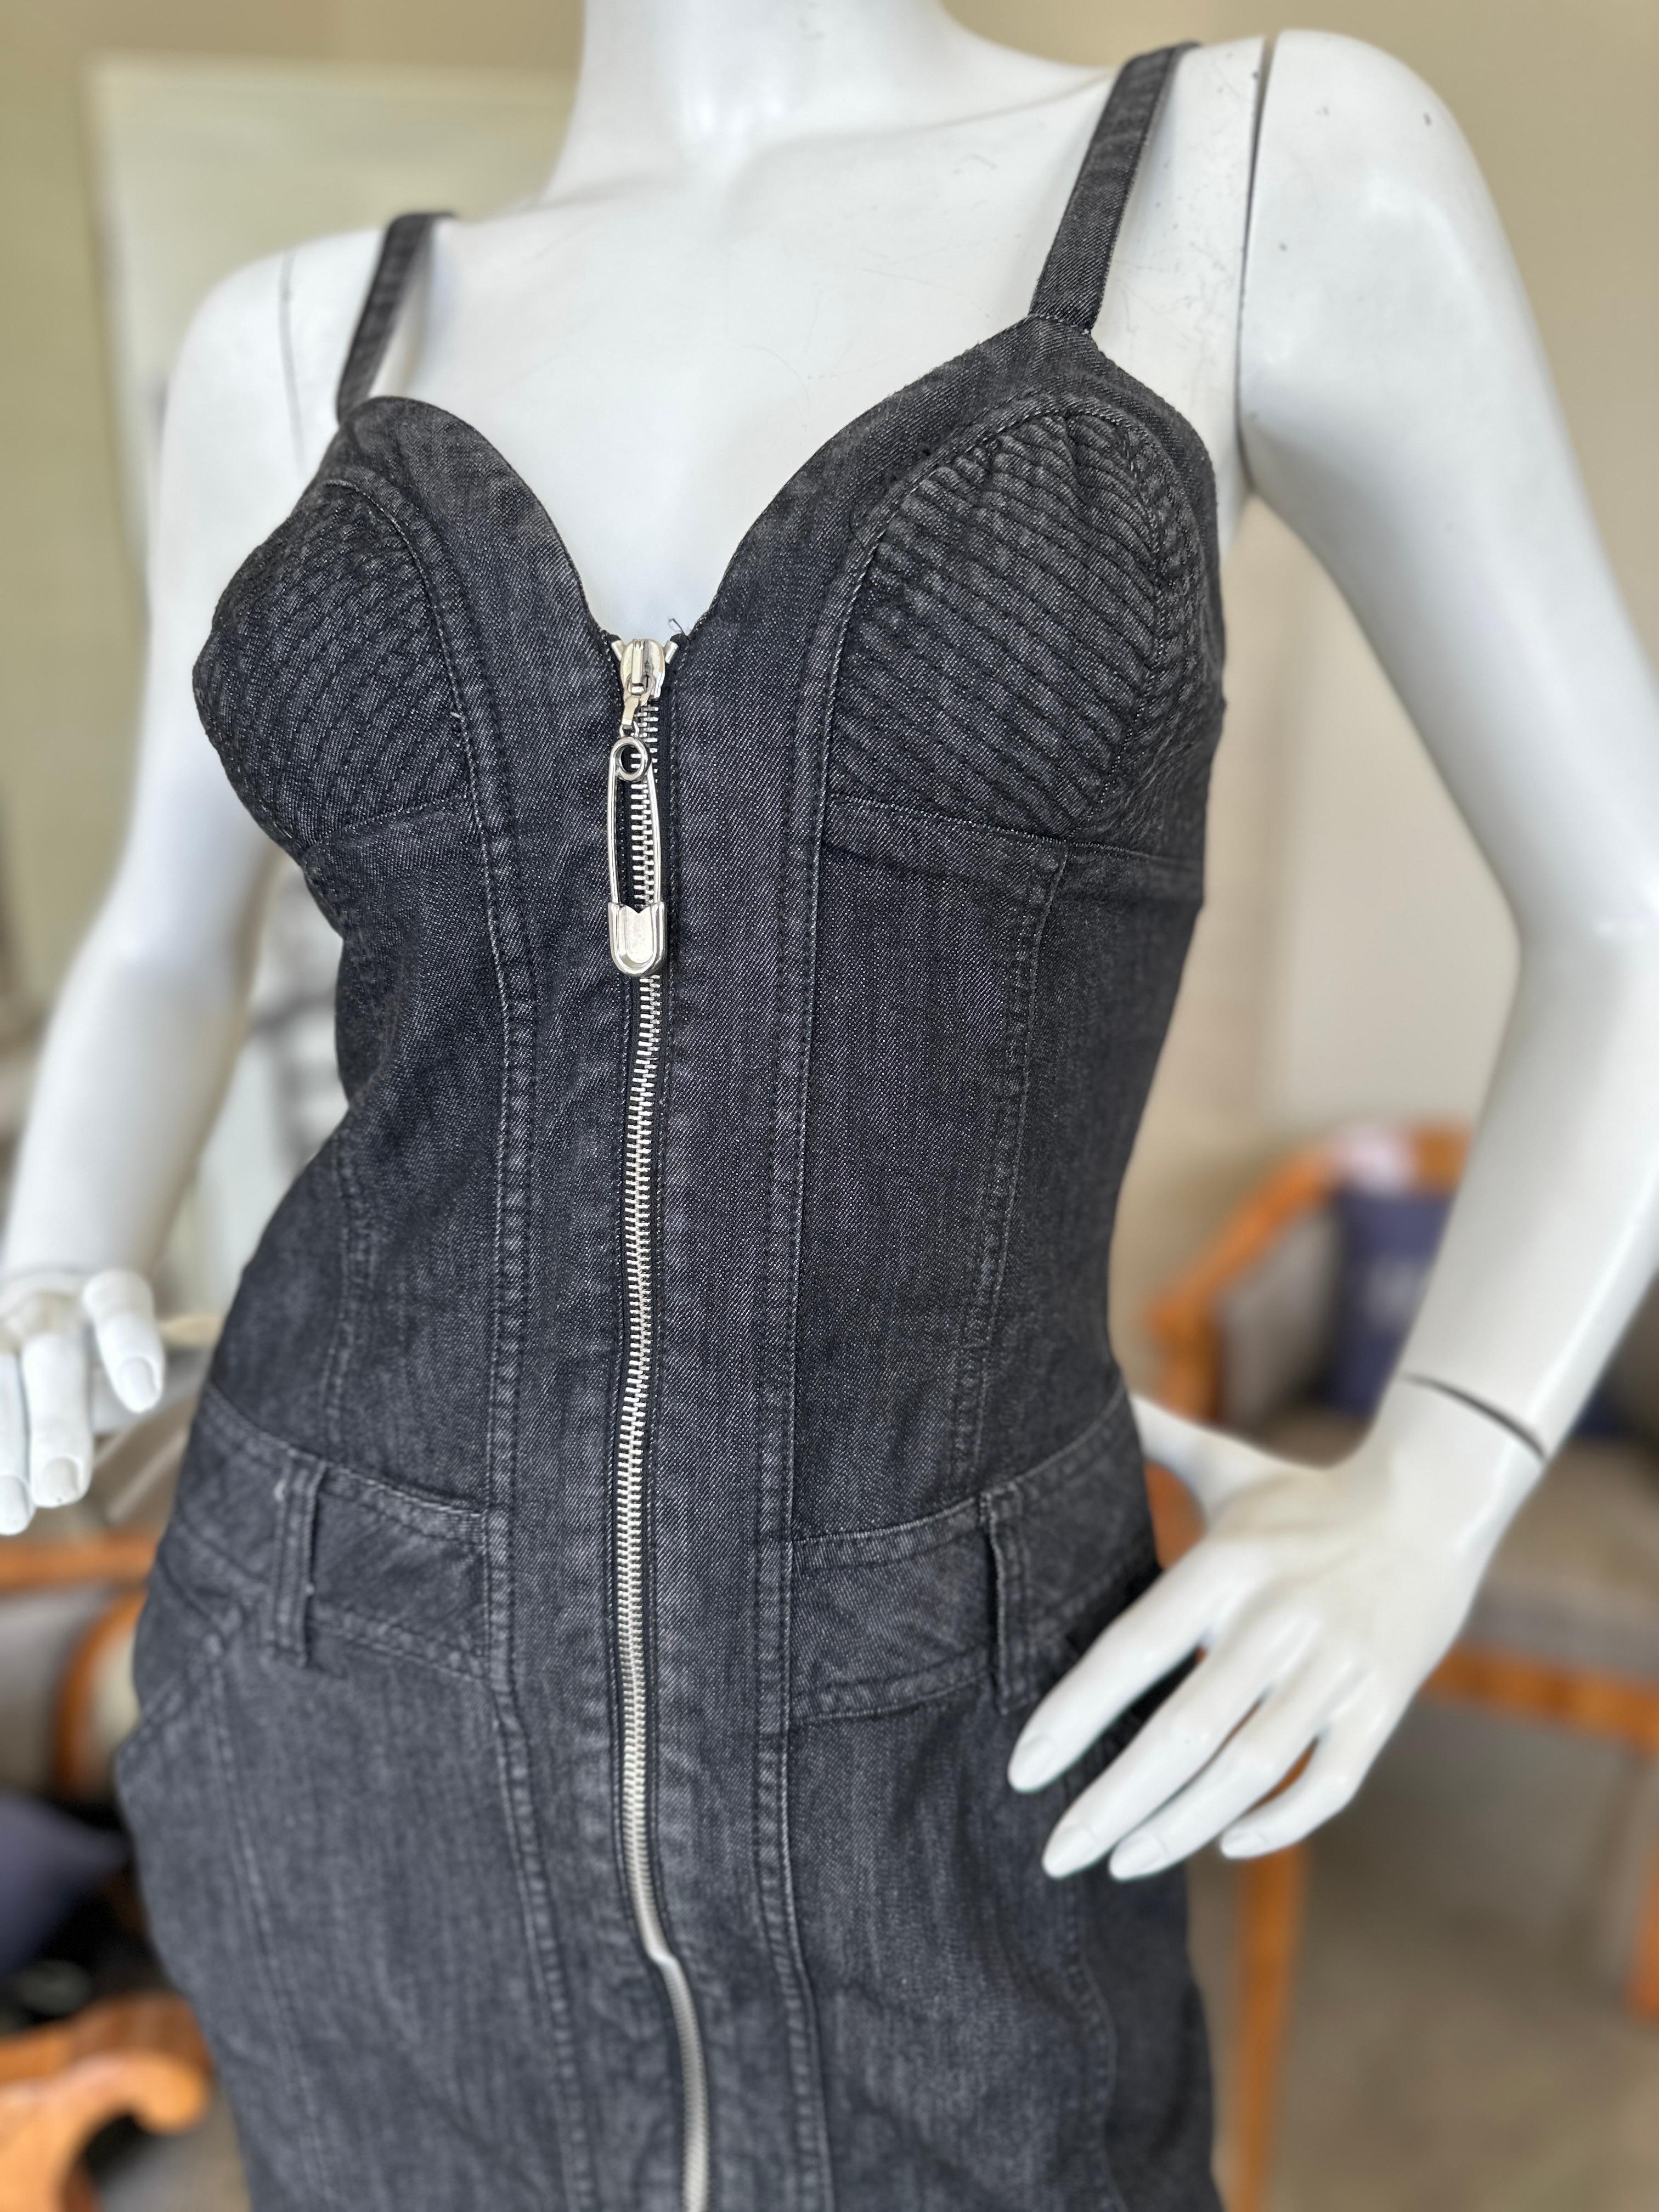 Moschino Jeans Vintage Denim Zip Front Dress In Excellent Condition For Sale In Cloverdale, CA